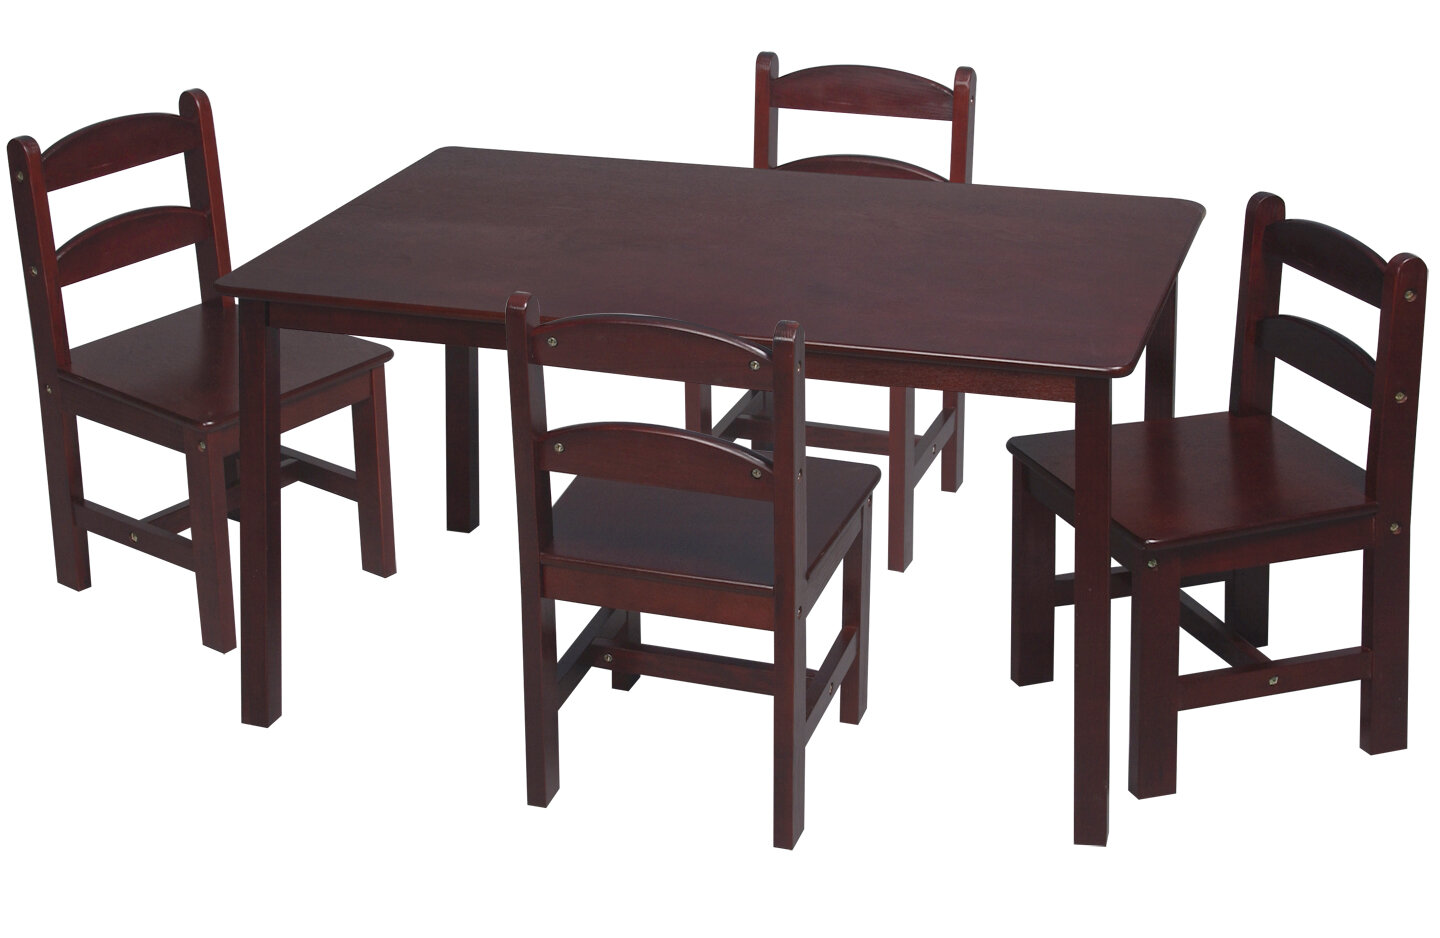 kids 5 piece table and chairs